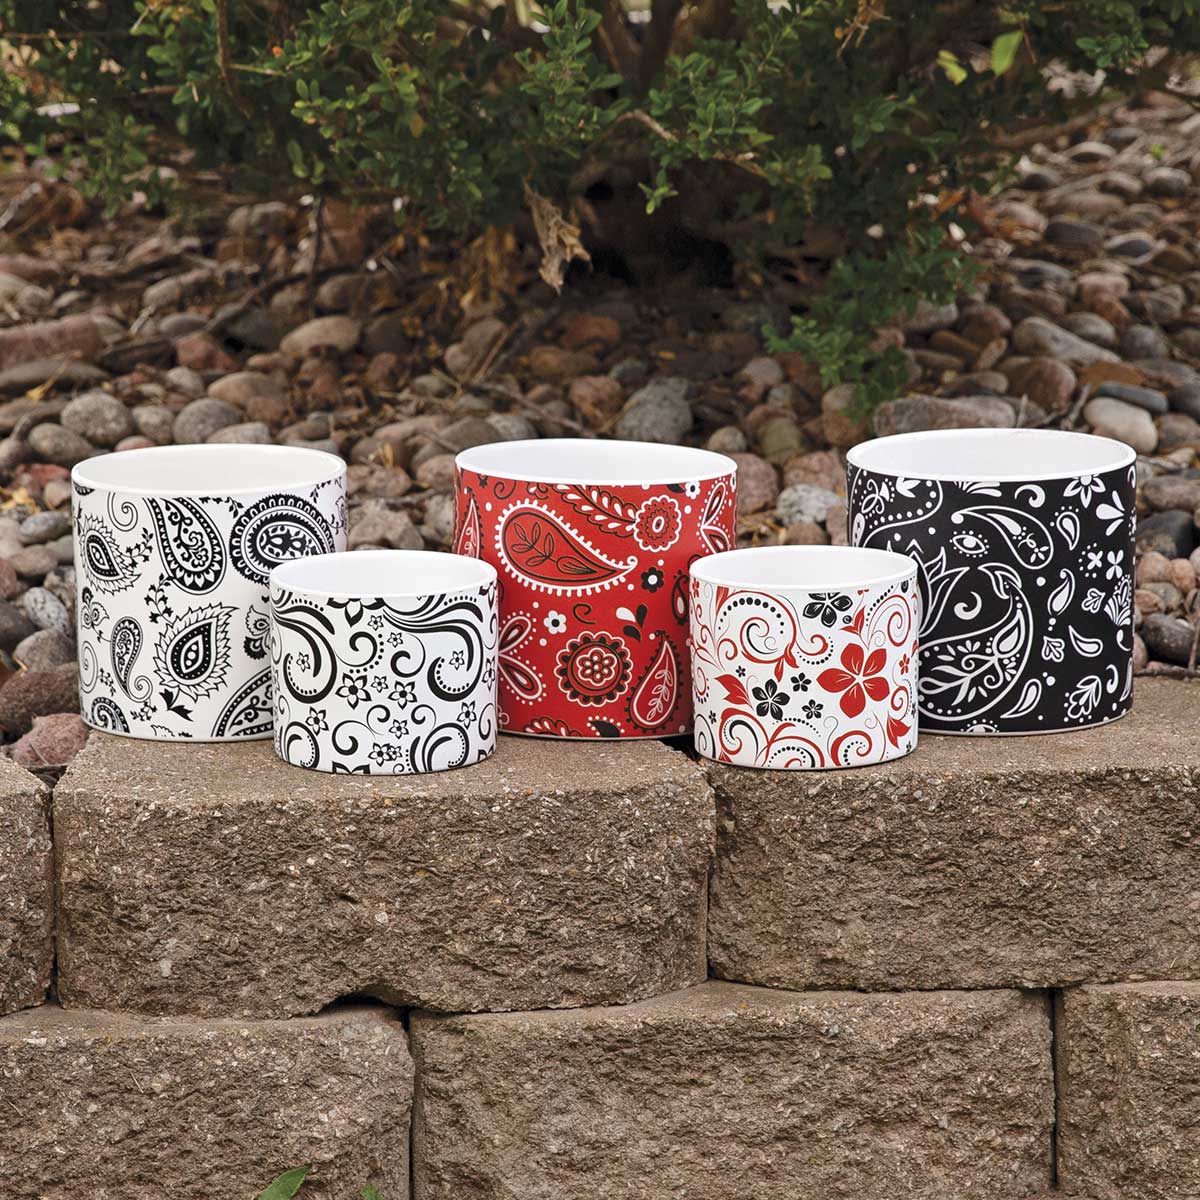 POT CLASSIC PAISLEY LARGE 5IN X 4.75IN BLACK/WHITE PORCELAIN